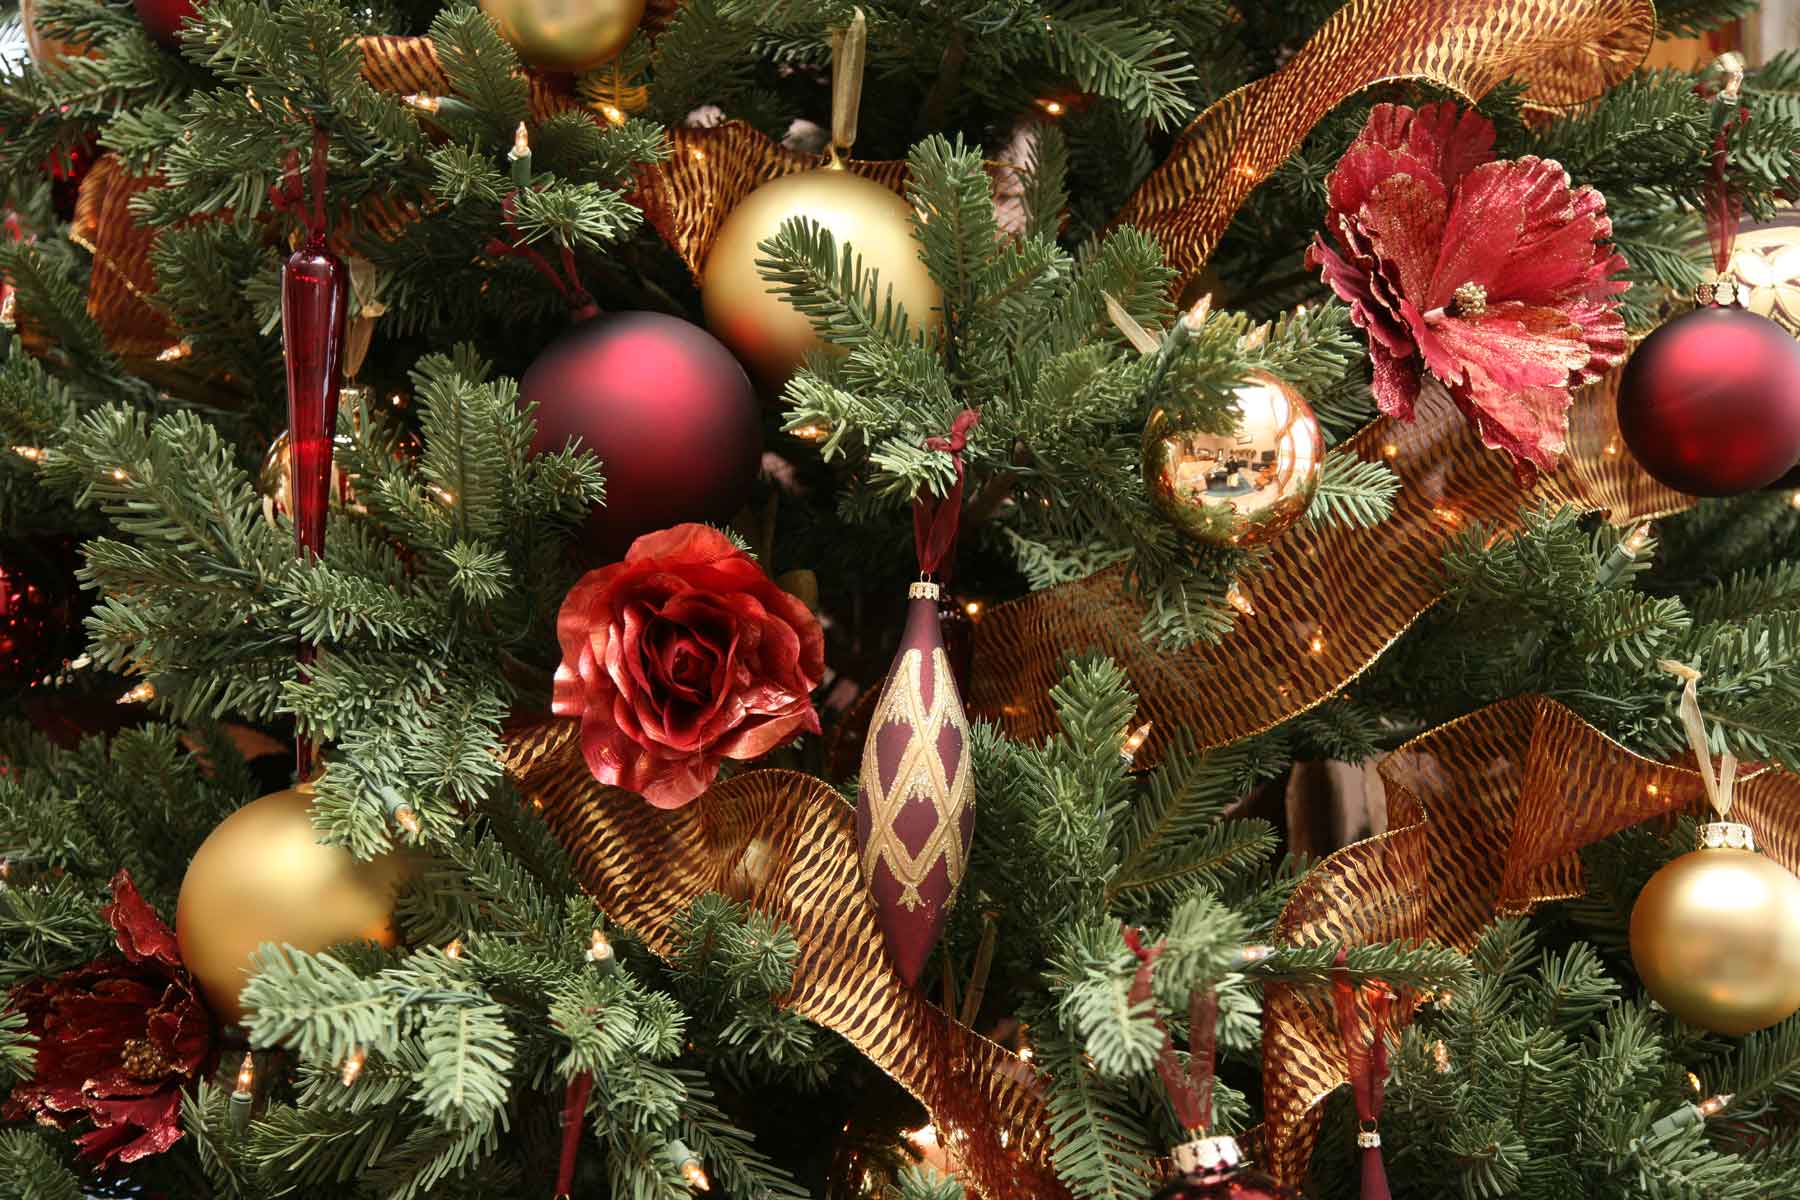 Colorful Christmas tree ornaments on a festive background.